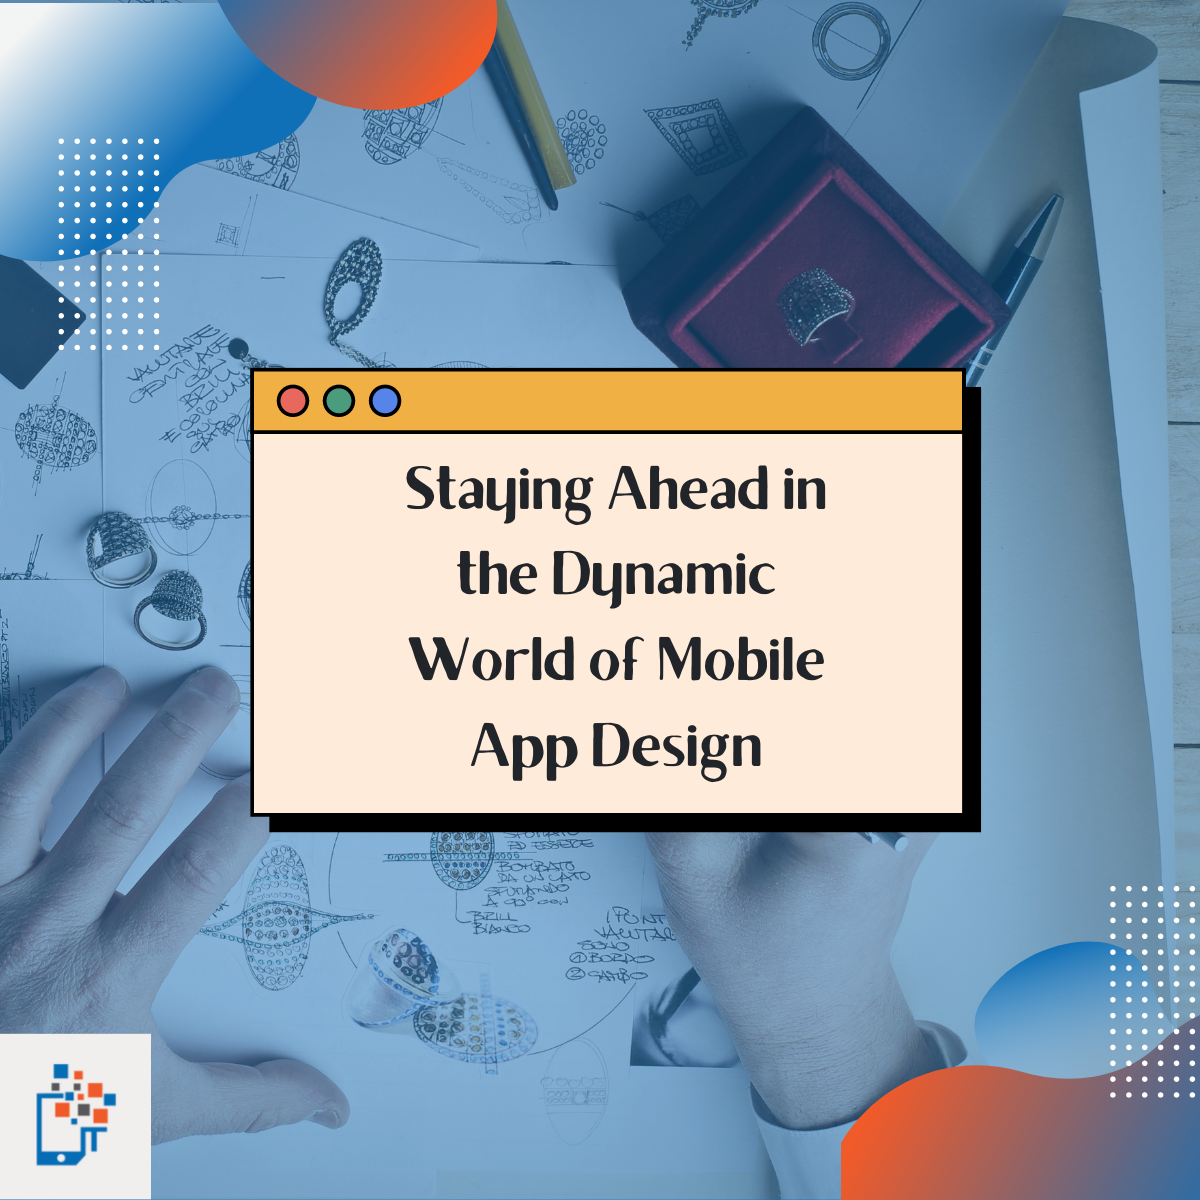 Staying Ahead in the Dynamic World of Mobile App Design